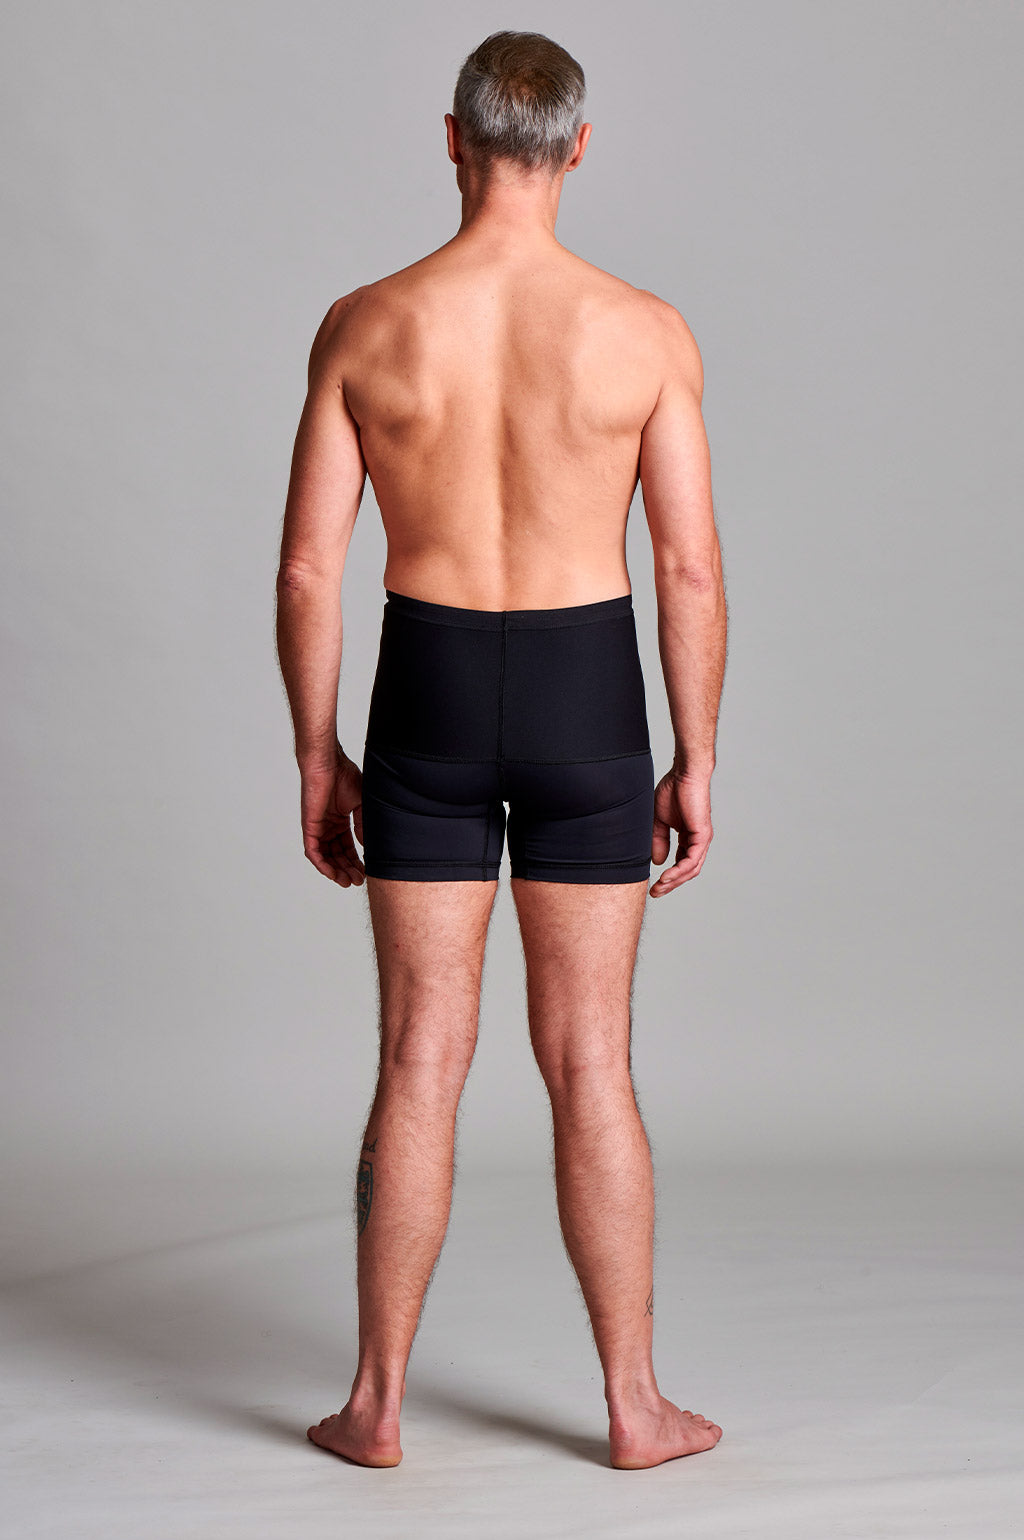 CUI Mens Hernia Low Waist Support Girdle With Legs - 1 each